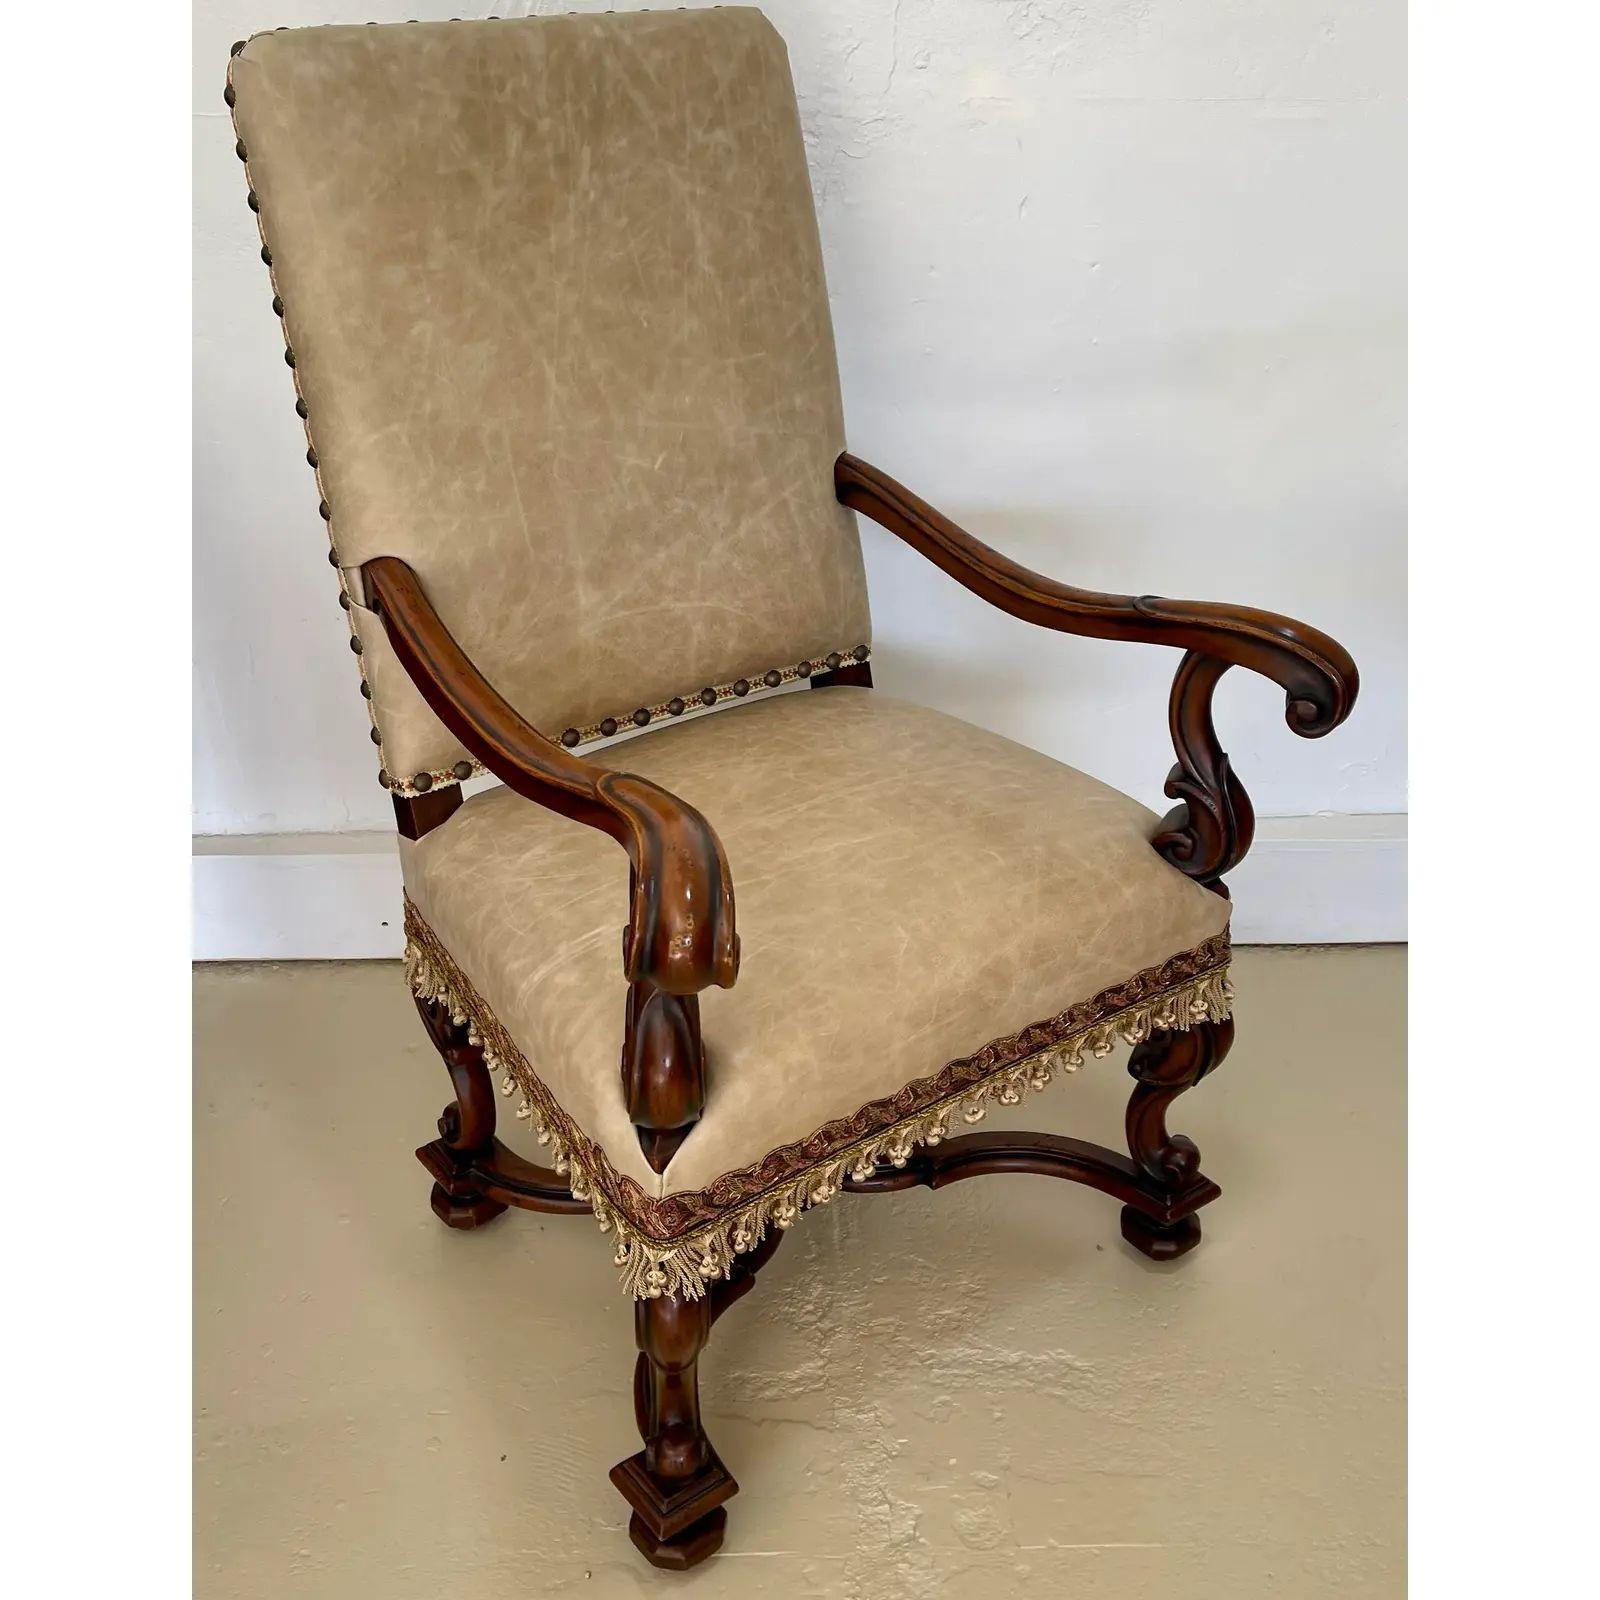 20th Century 18th C Style Ebanista Spanish Colonial Dining Chair with Leather Armorial Crest For Sale